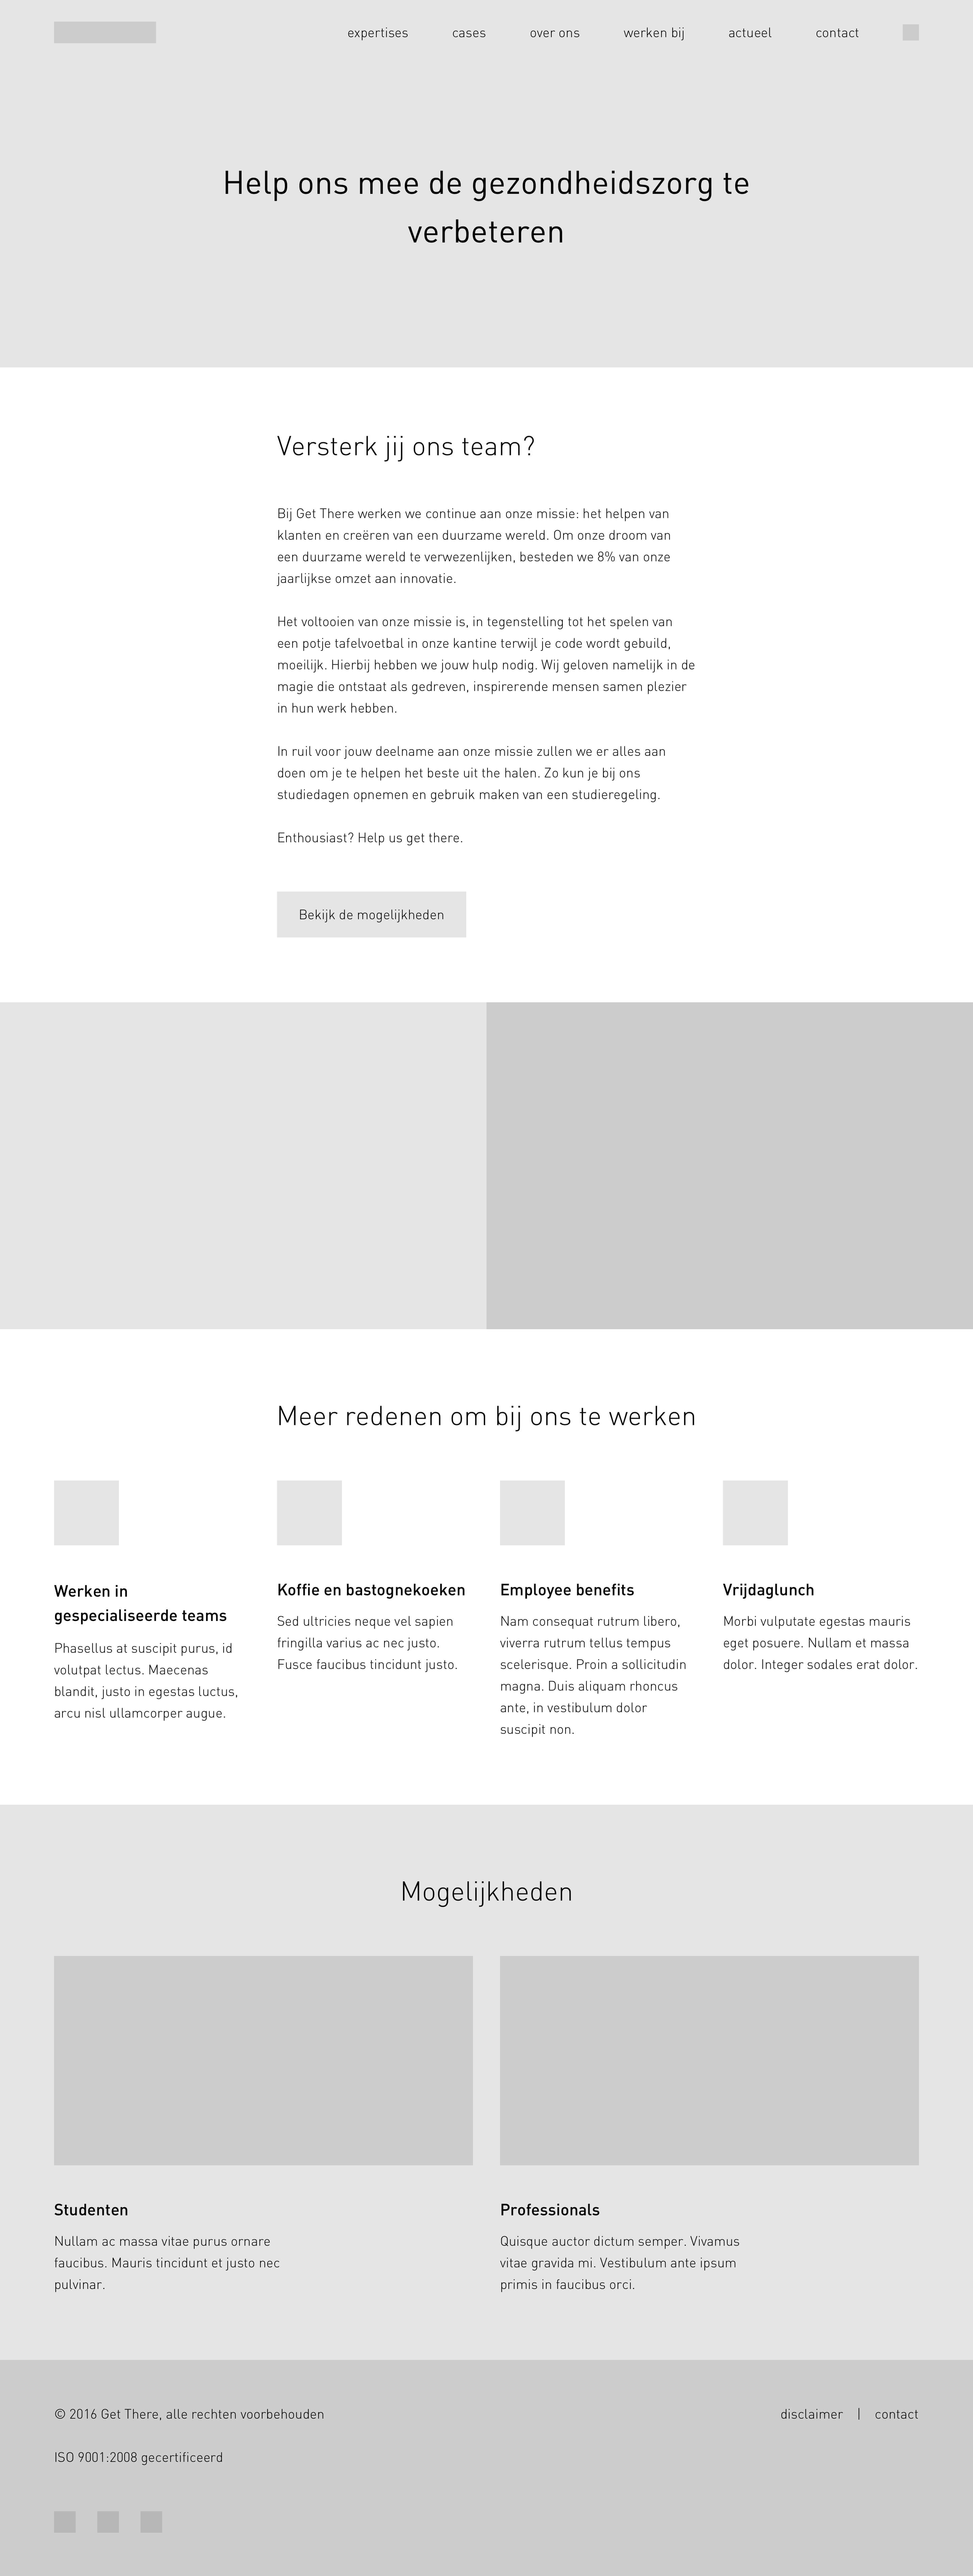 A wireframe for the desktop version of the Careers page